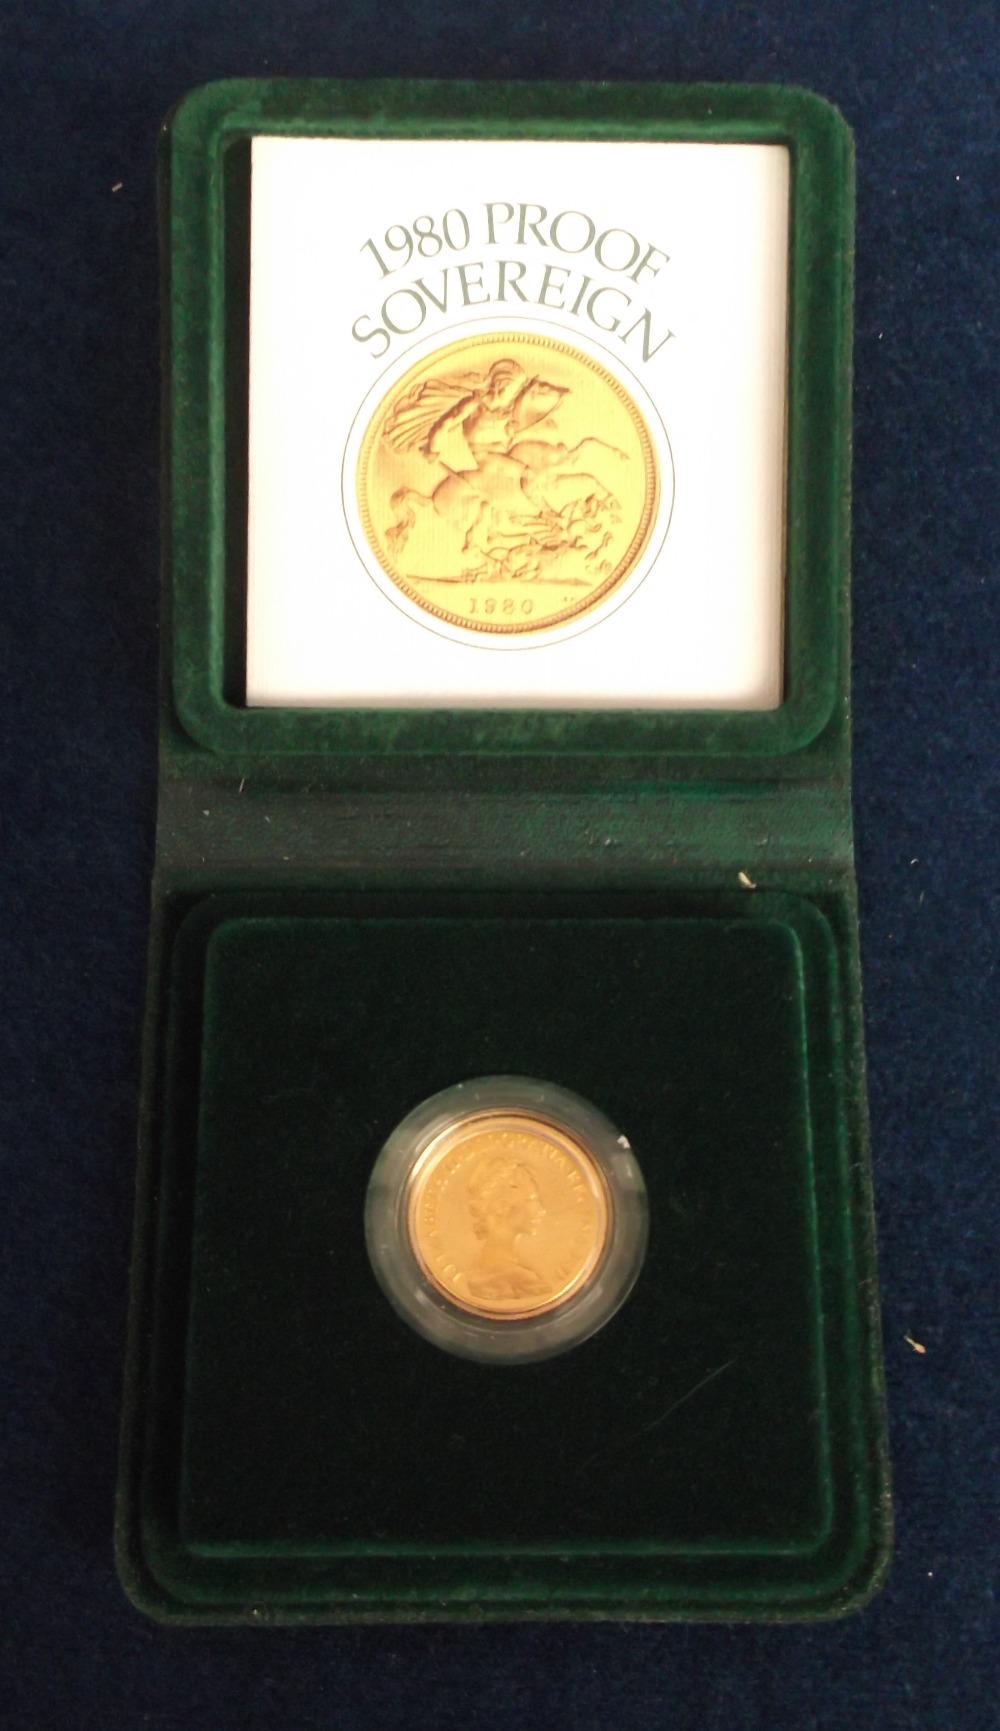 Coin, GB, a Royal Mint 1980 proof gold sovereign, in case of issue with leaflet.